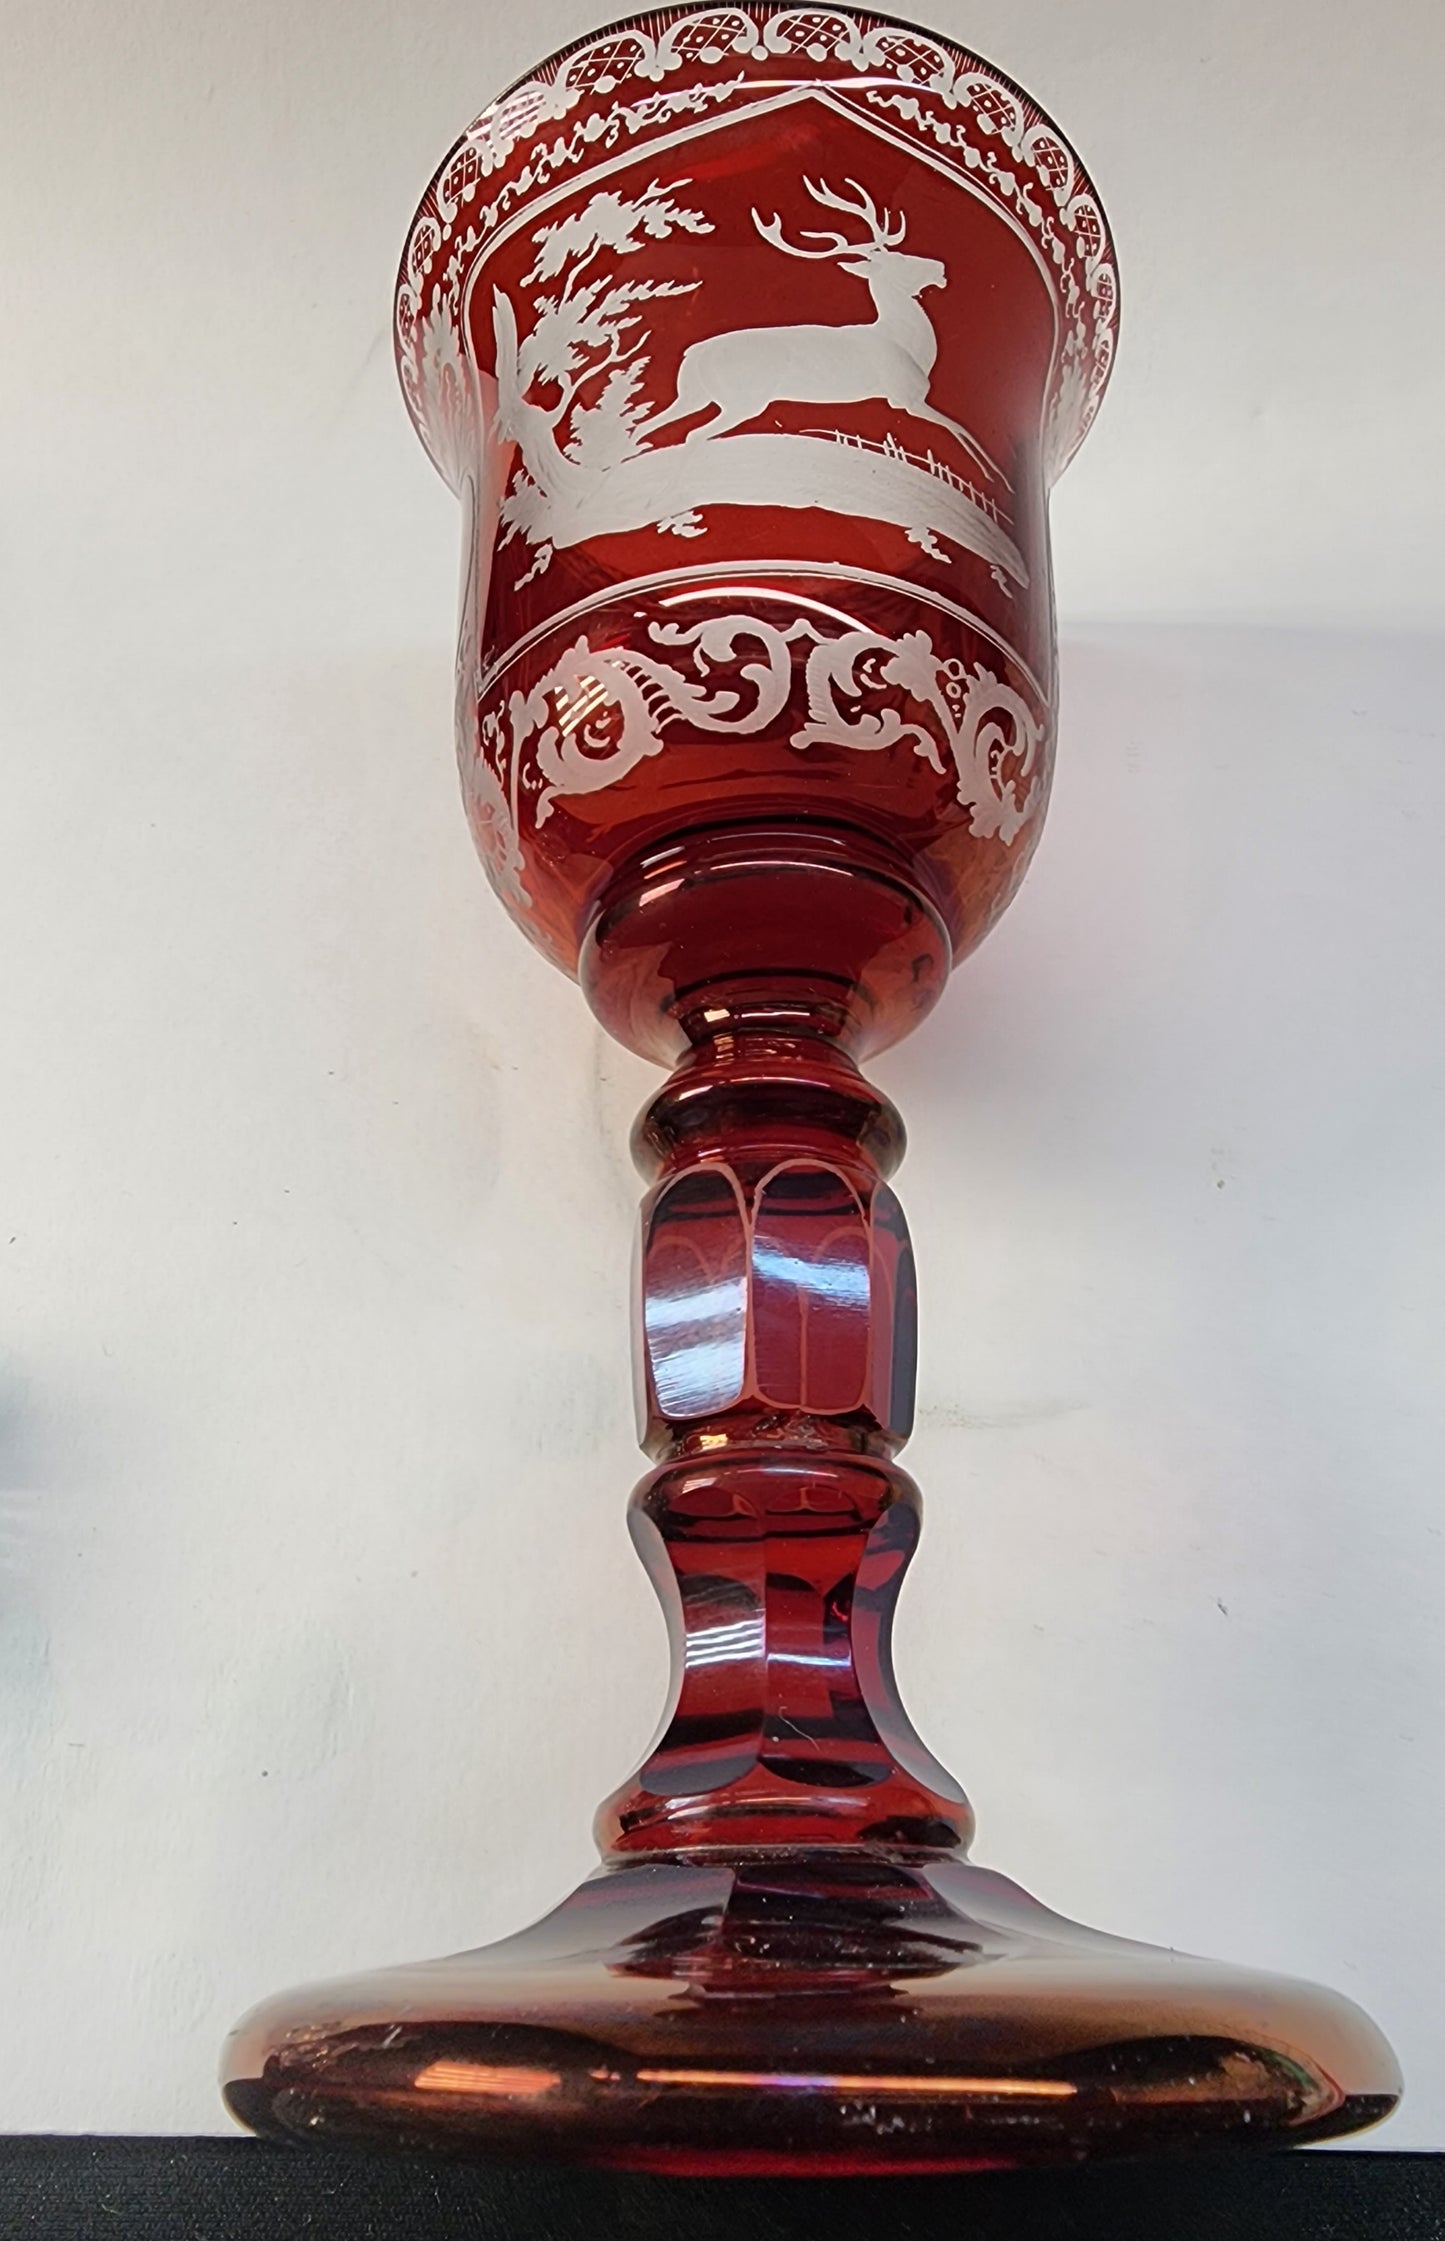 Engraved to clear vintage ruby glass chalice